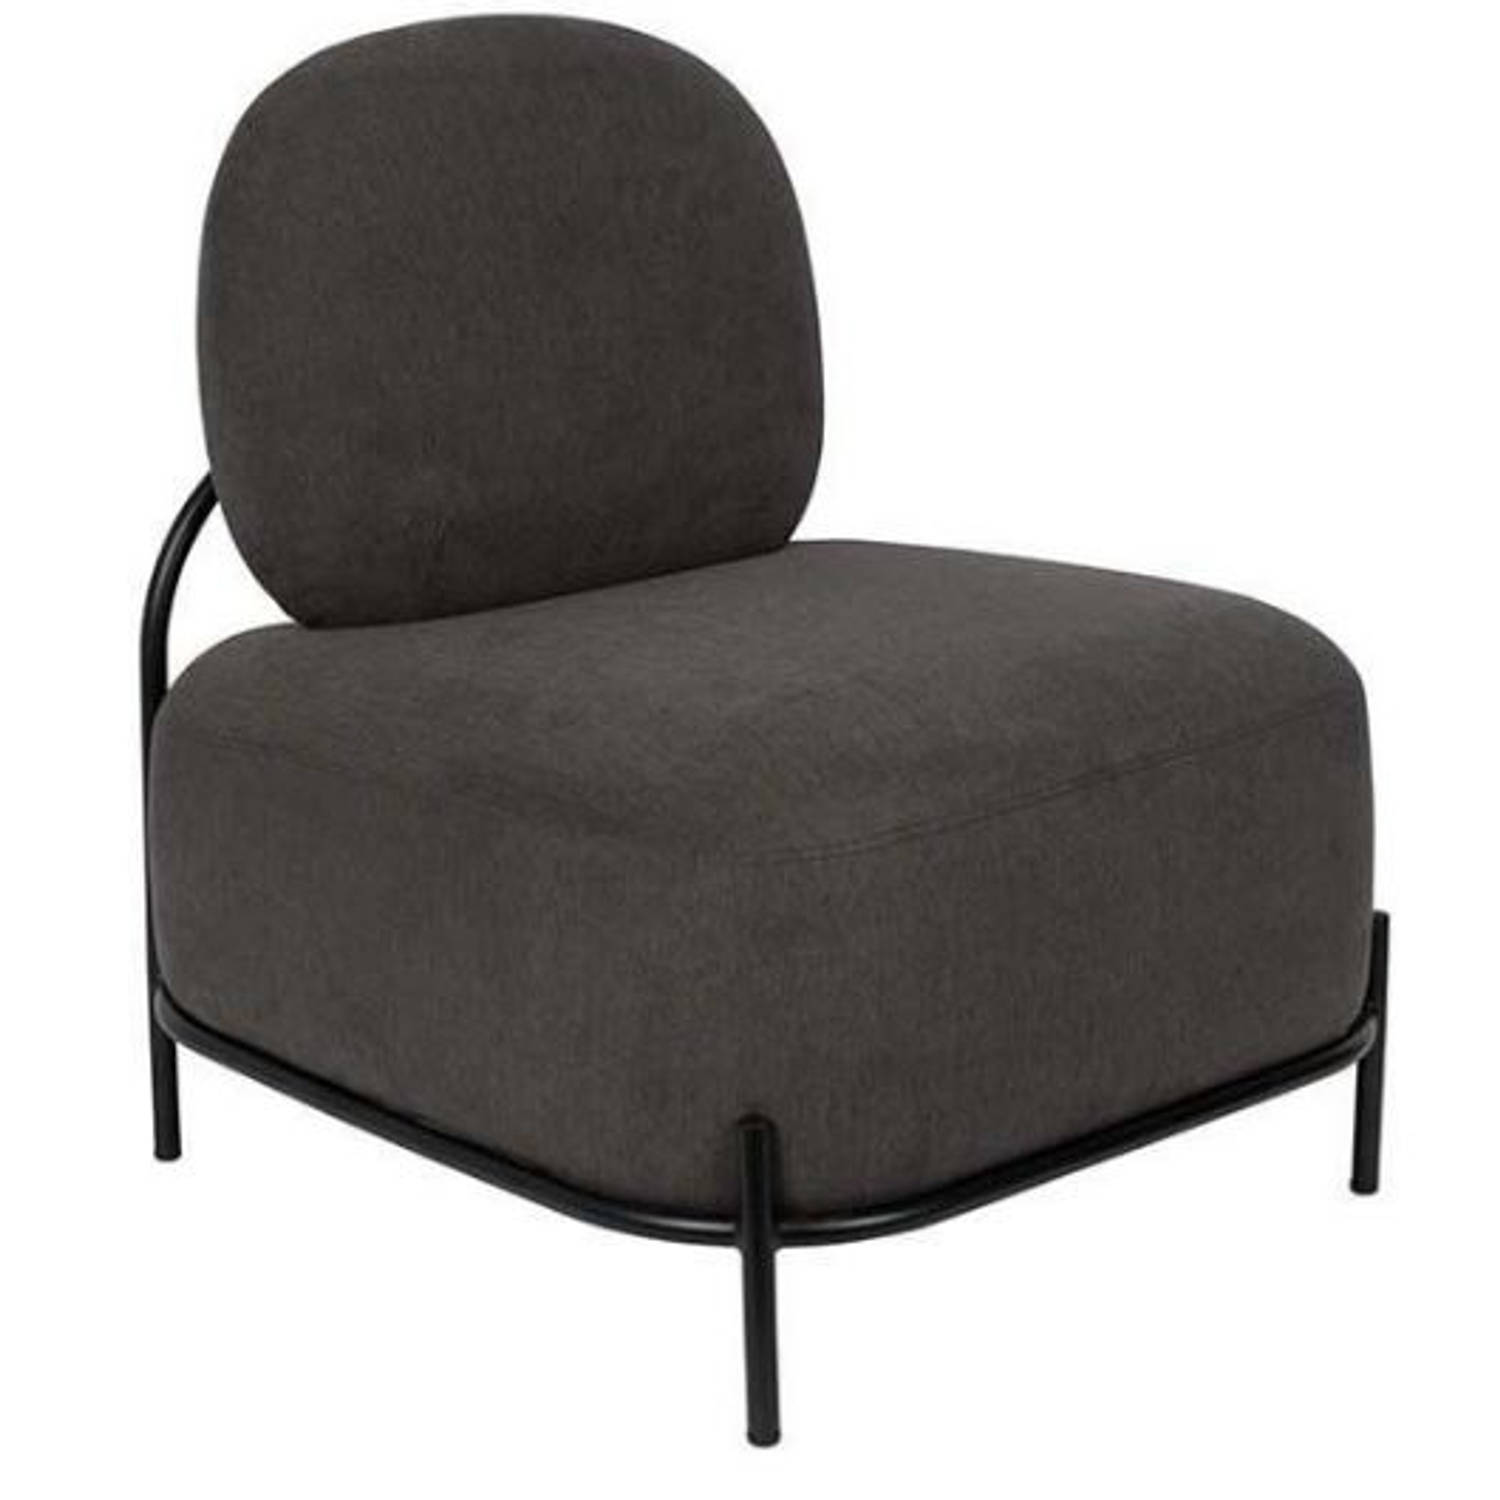 TOM fauteuil Polly 77 x 72 x 66 cm polyester/staal donkergrijs